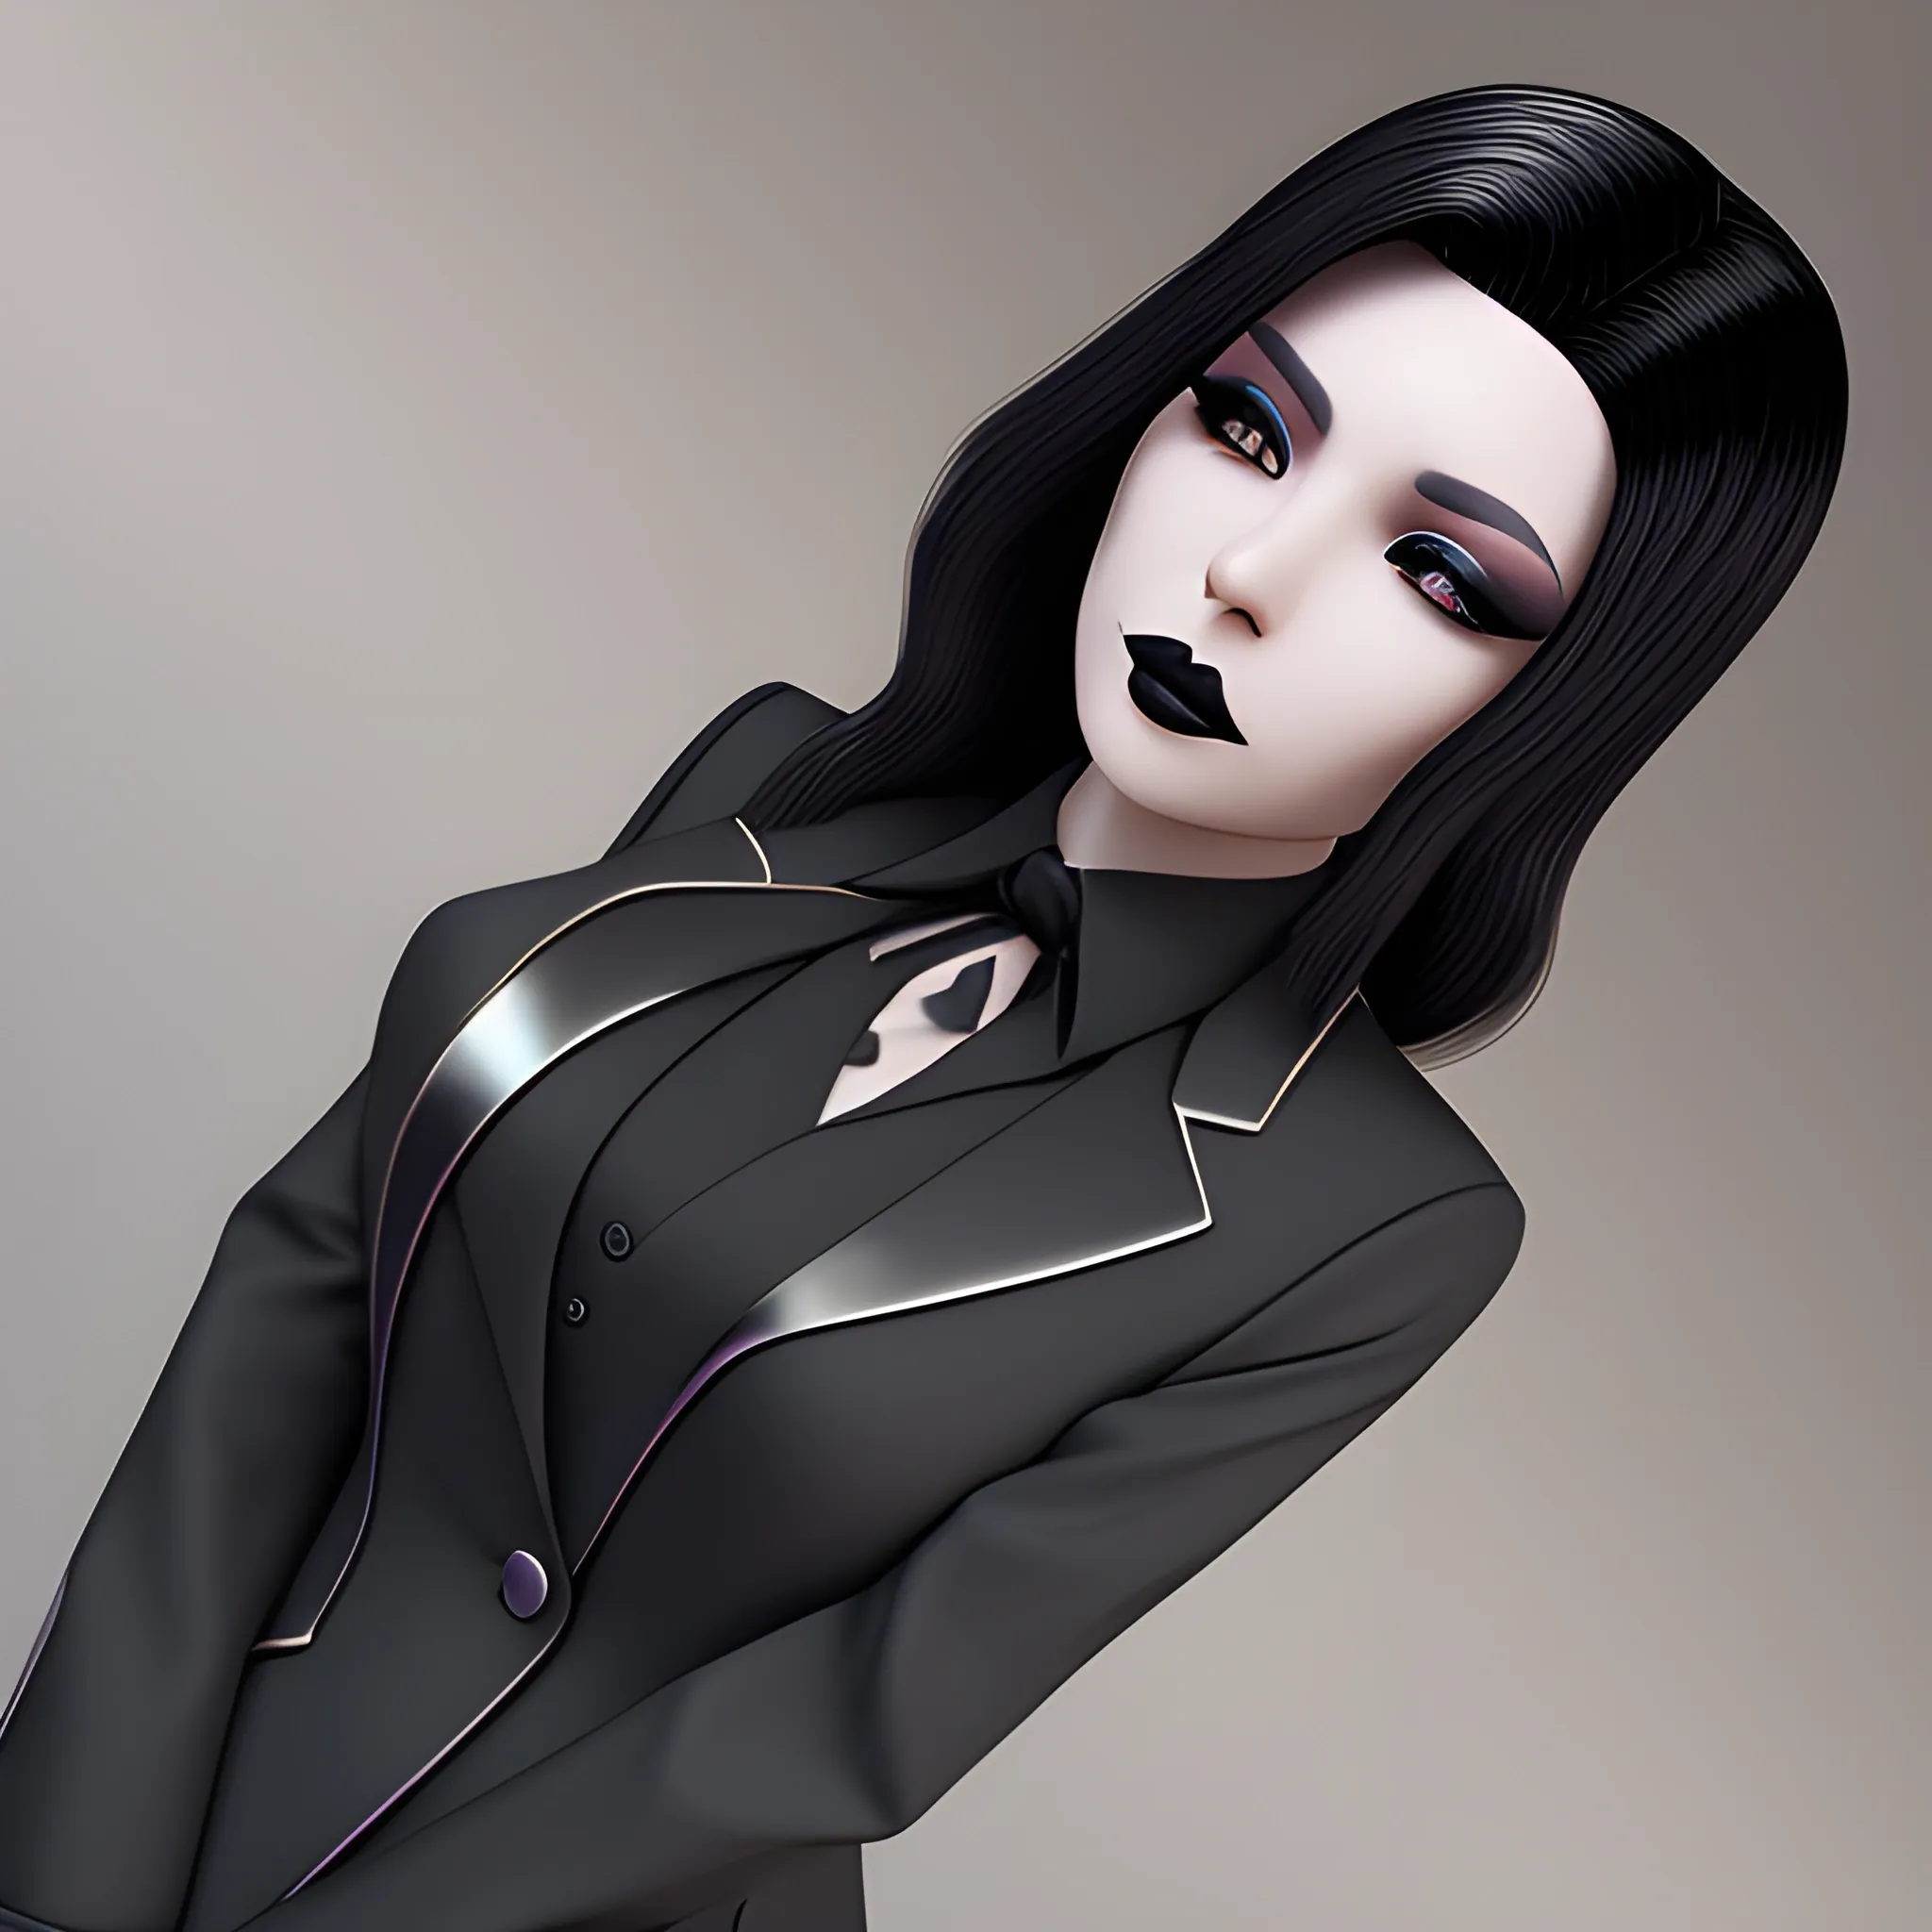 Beautiful fully black haired shoulder length business woman with black lipstick and eye makeup dressed in fancy all black funeral suit black long tie fancy all black button up dress shirt full body pose photo realistic 24k ultra realistic quality 3D no deformation